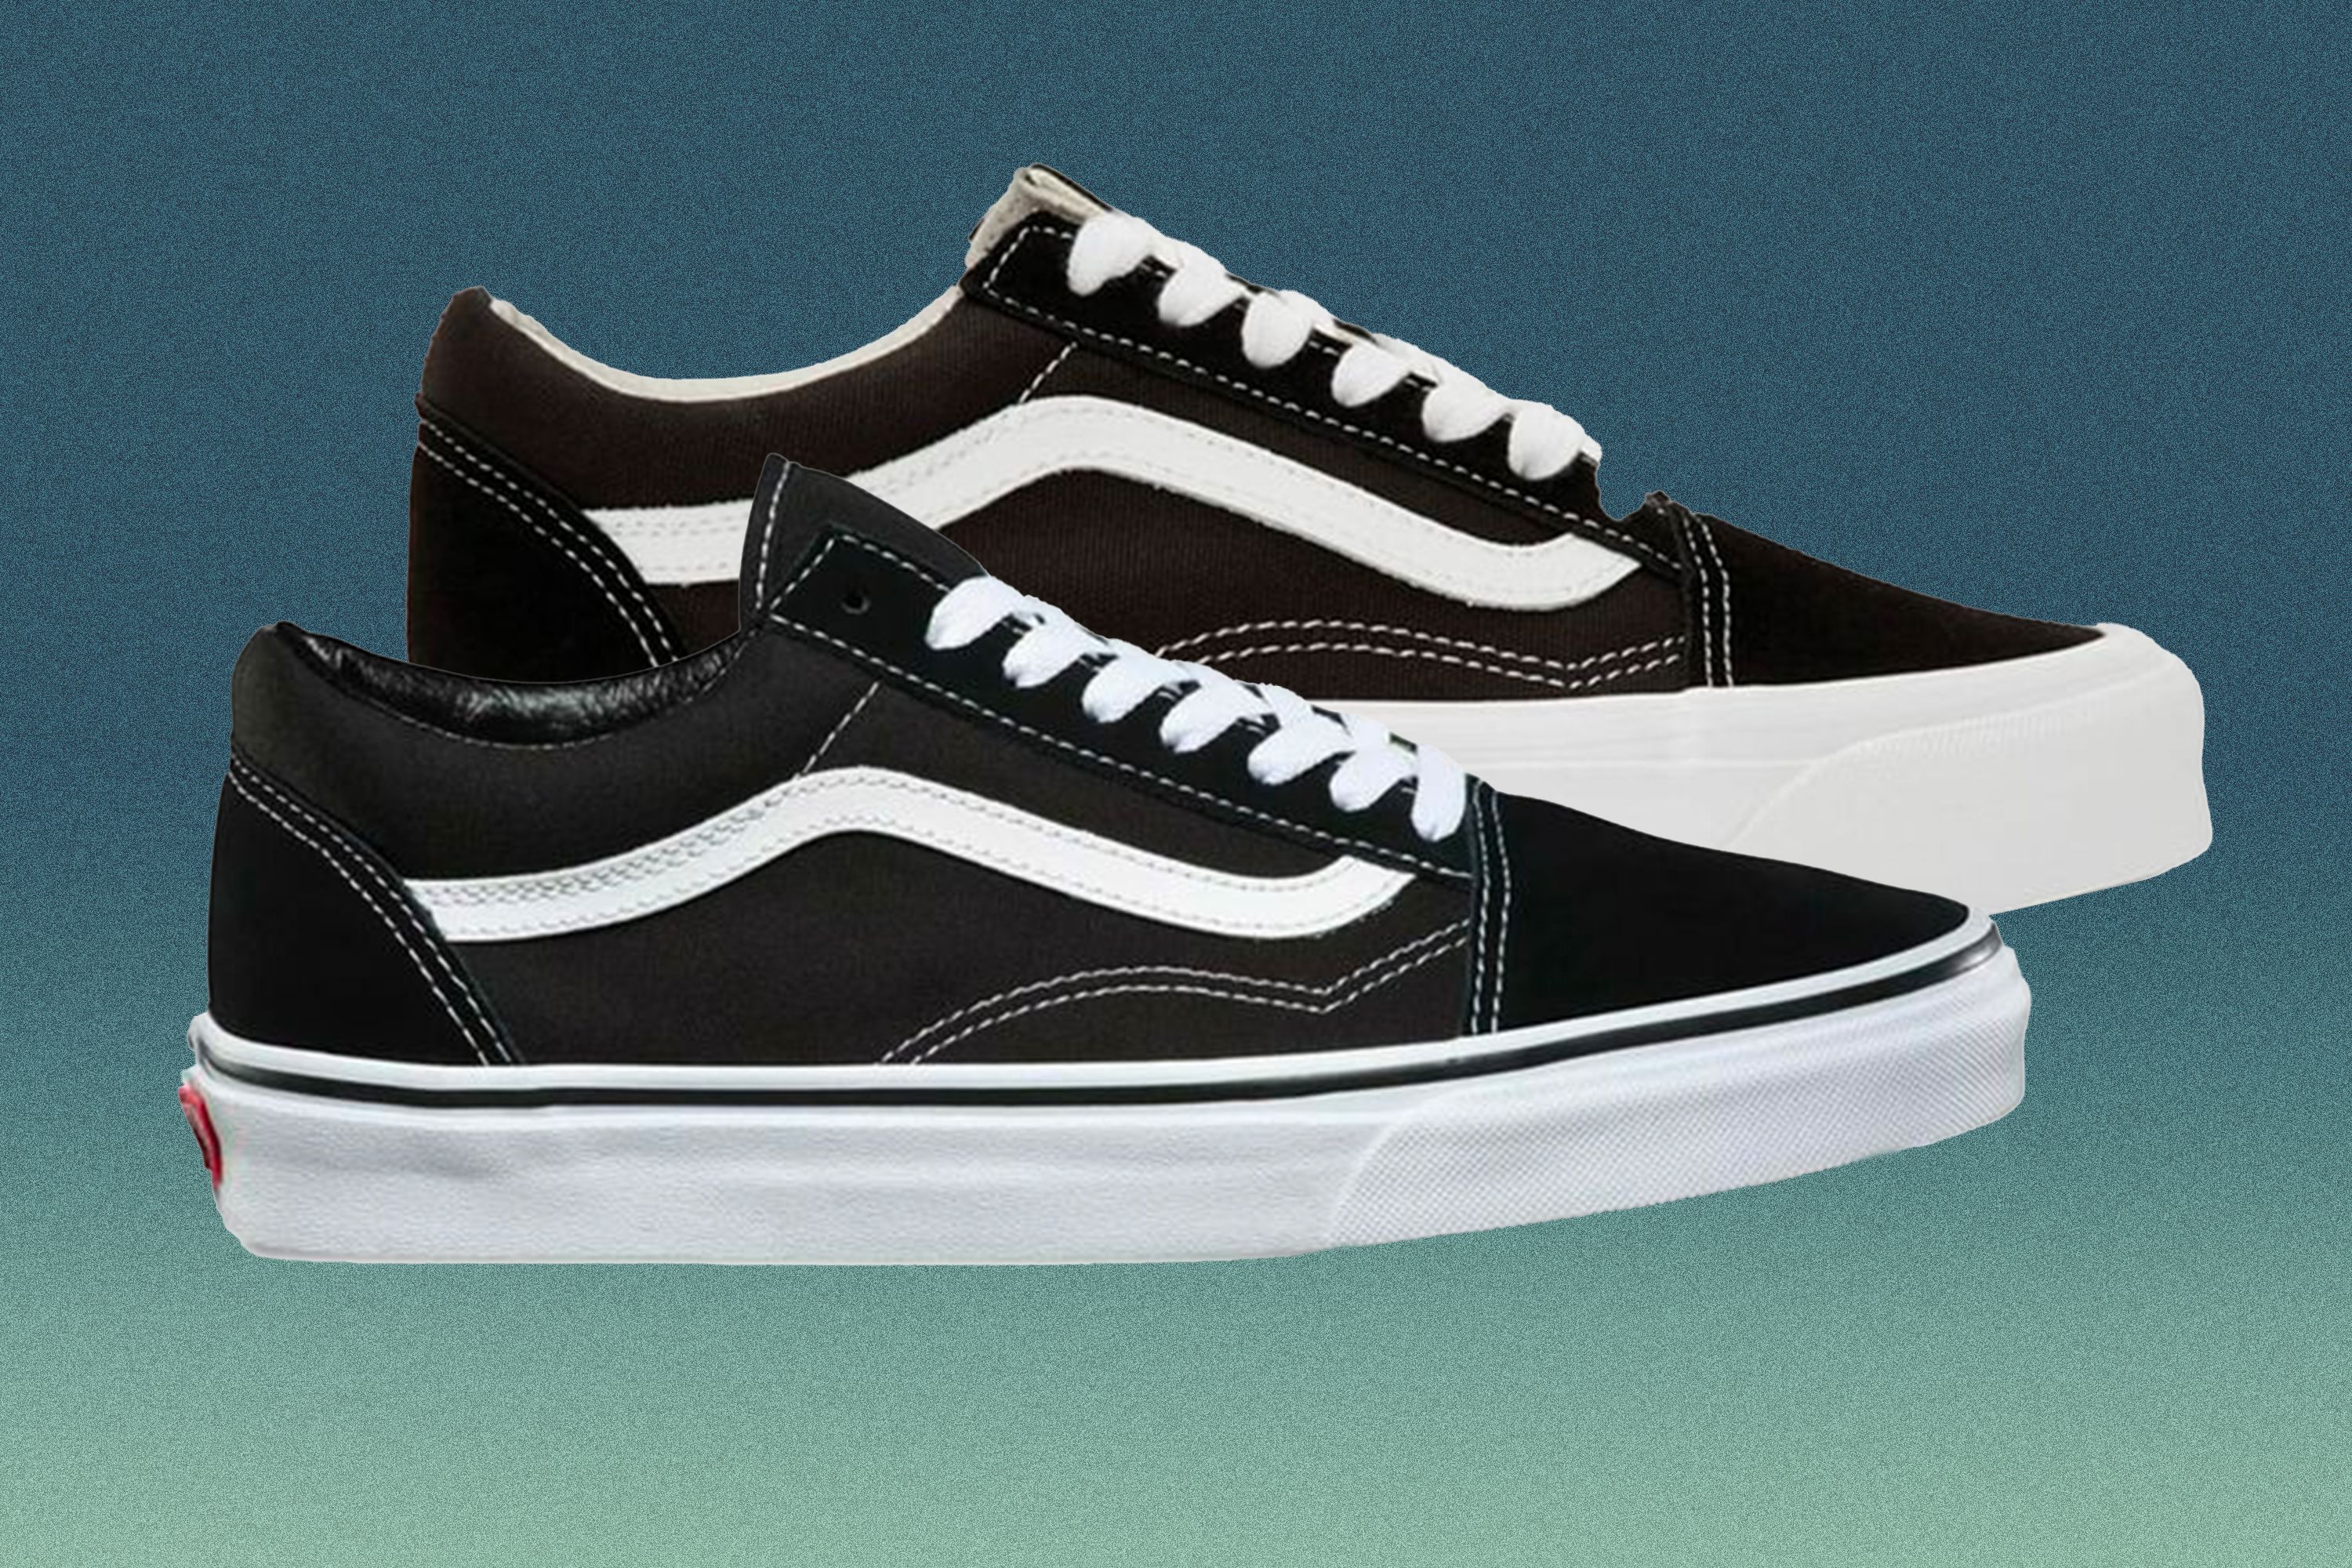 Quien realce Demostrar Why Are Vault by Vans Sneakers More Expensive Than Vans Classics?